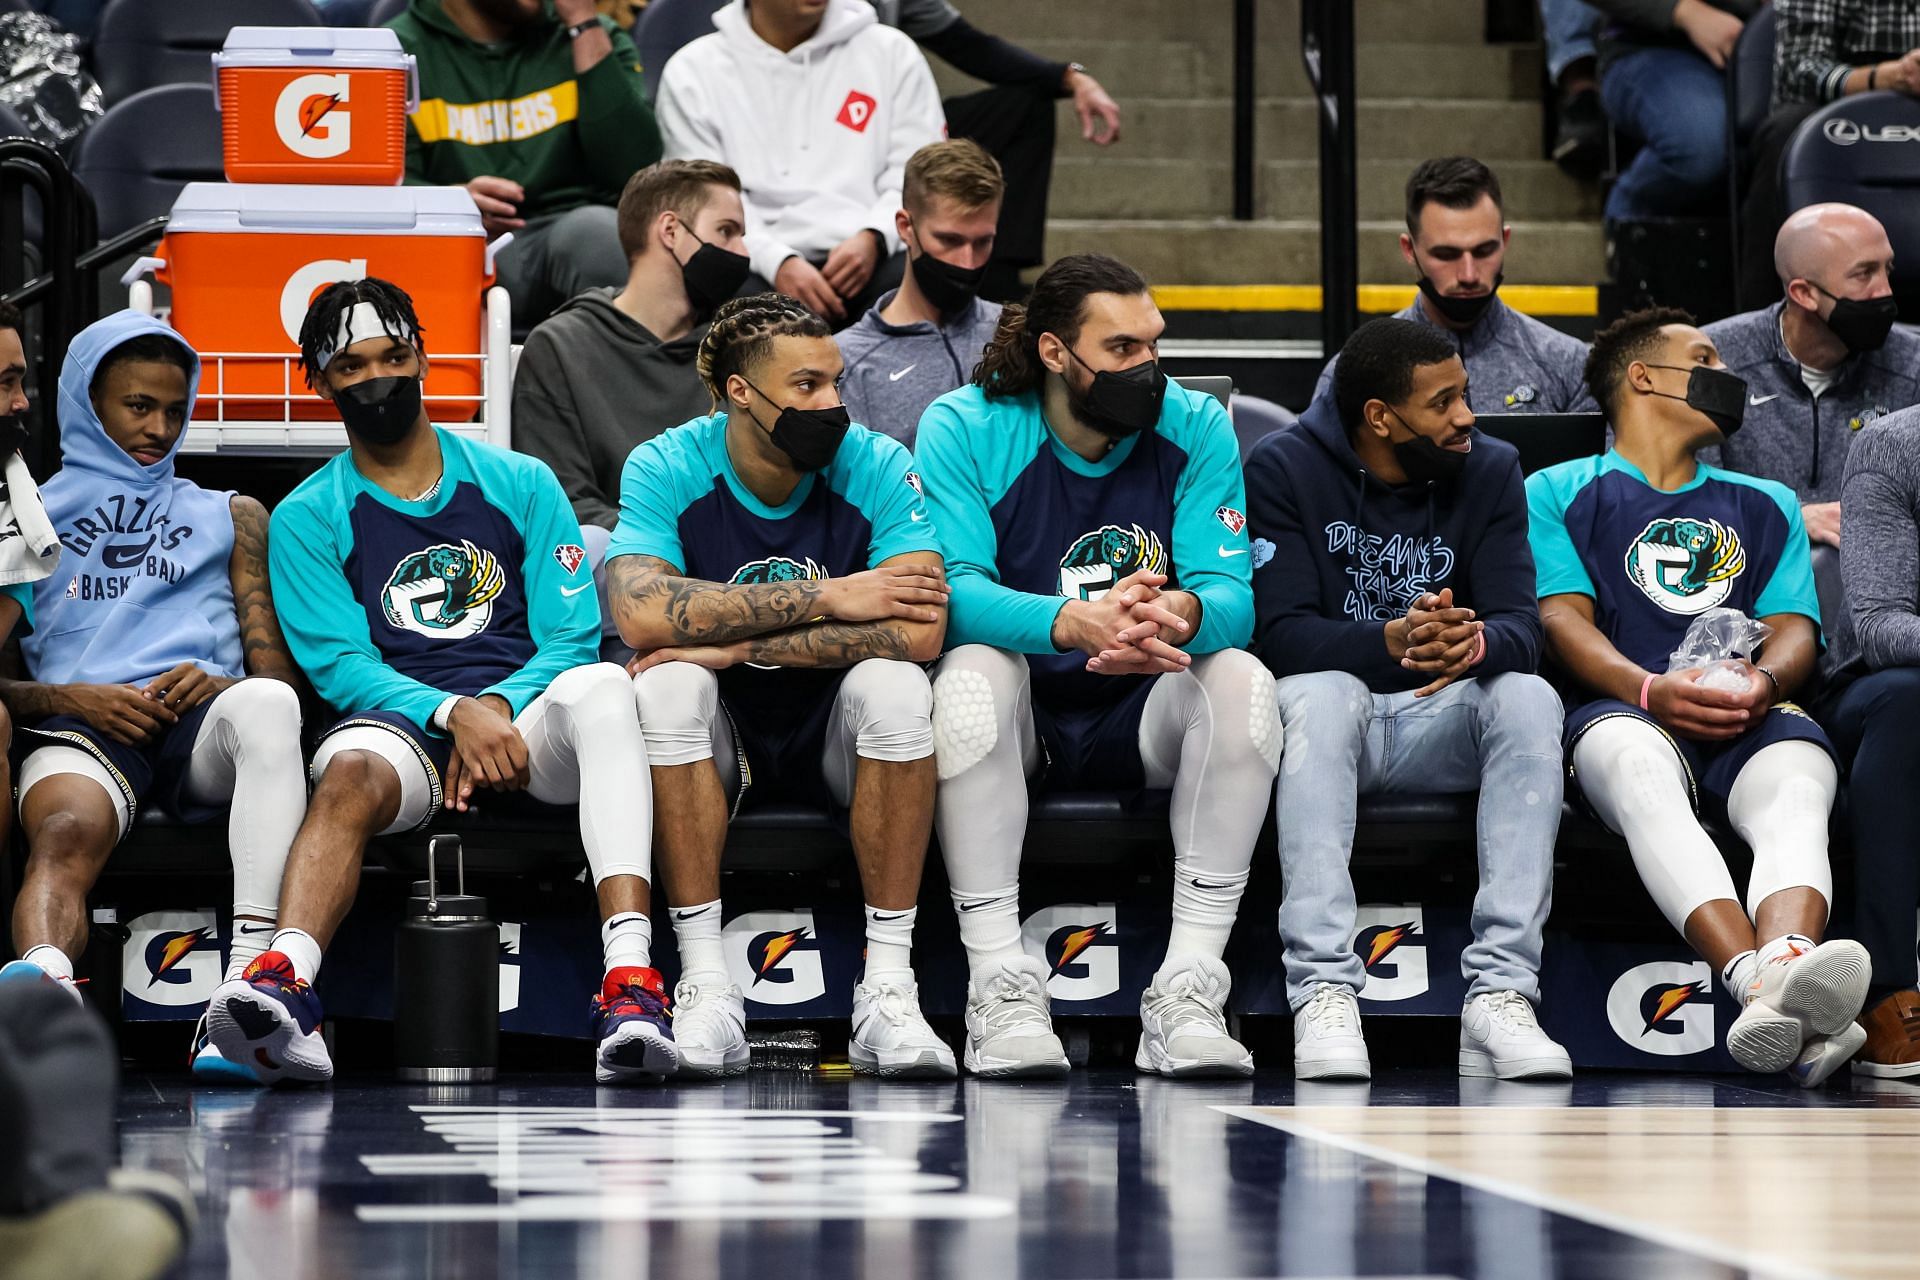 The Memphis Grizzlies&#039; bench looks on at the game vs the Minnesota Timberwolves